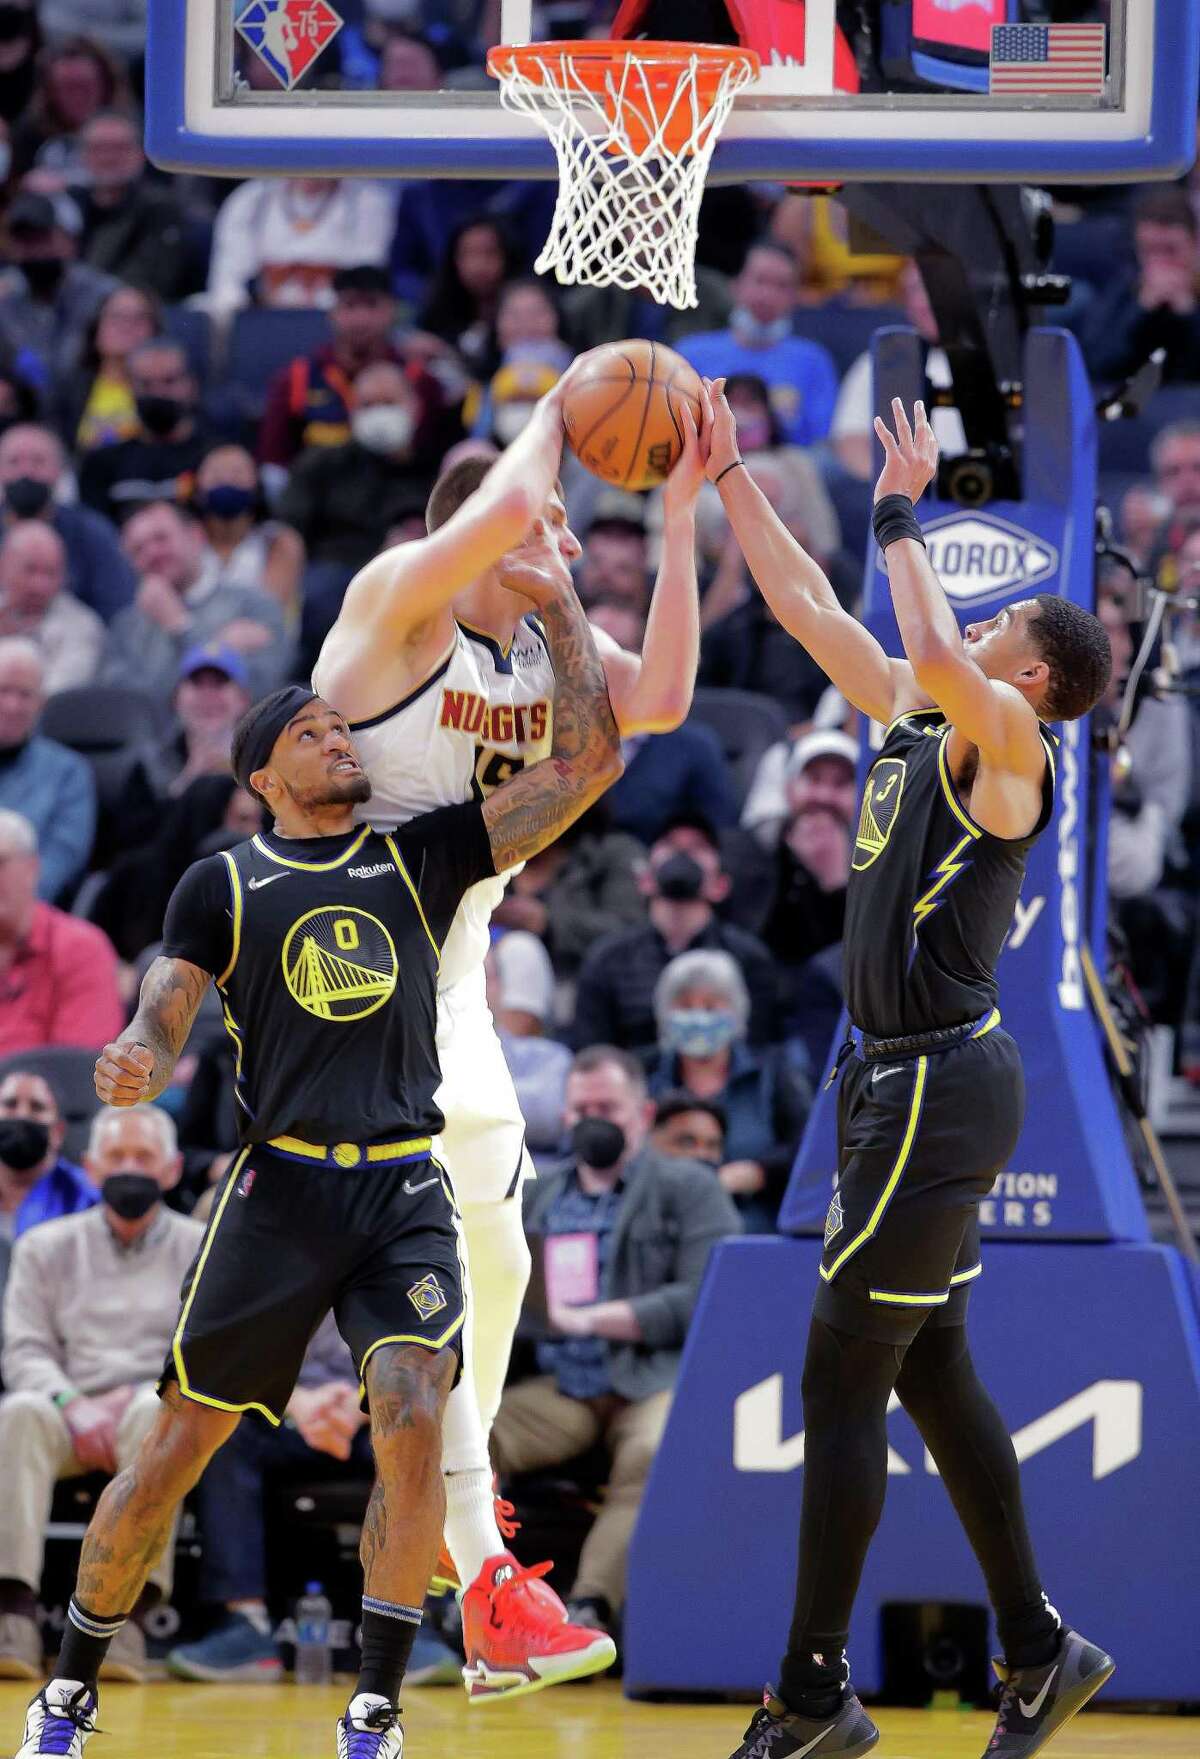 Gary Payton II (0) and Jordan Poole (3) defend against Nikola Jokic (15) in the first half as the Golden State Warriors played the Denver Nuggets at Chase Center in San Francisco, Calif., on Wednesday, February 16, 2022.